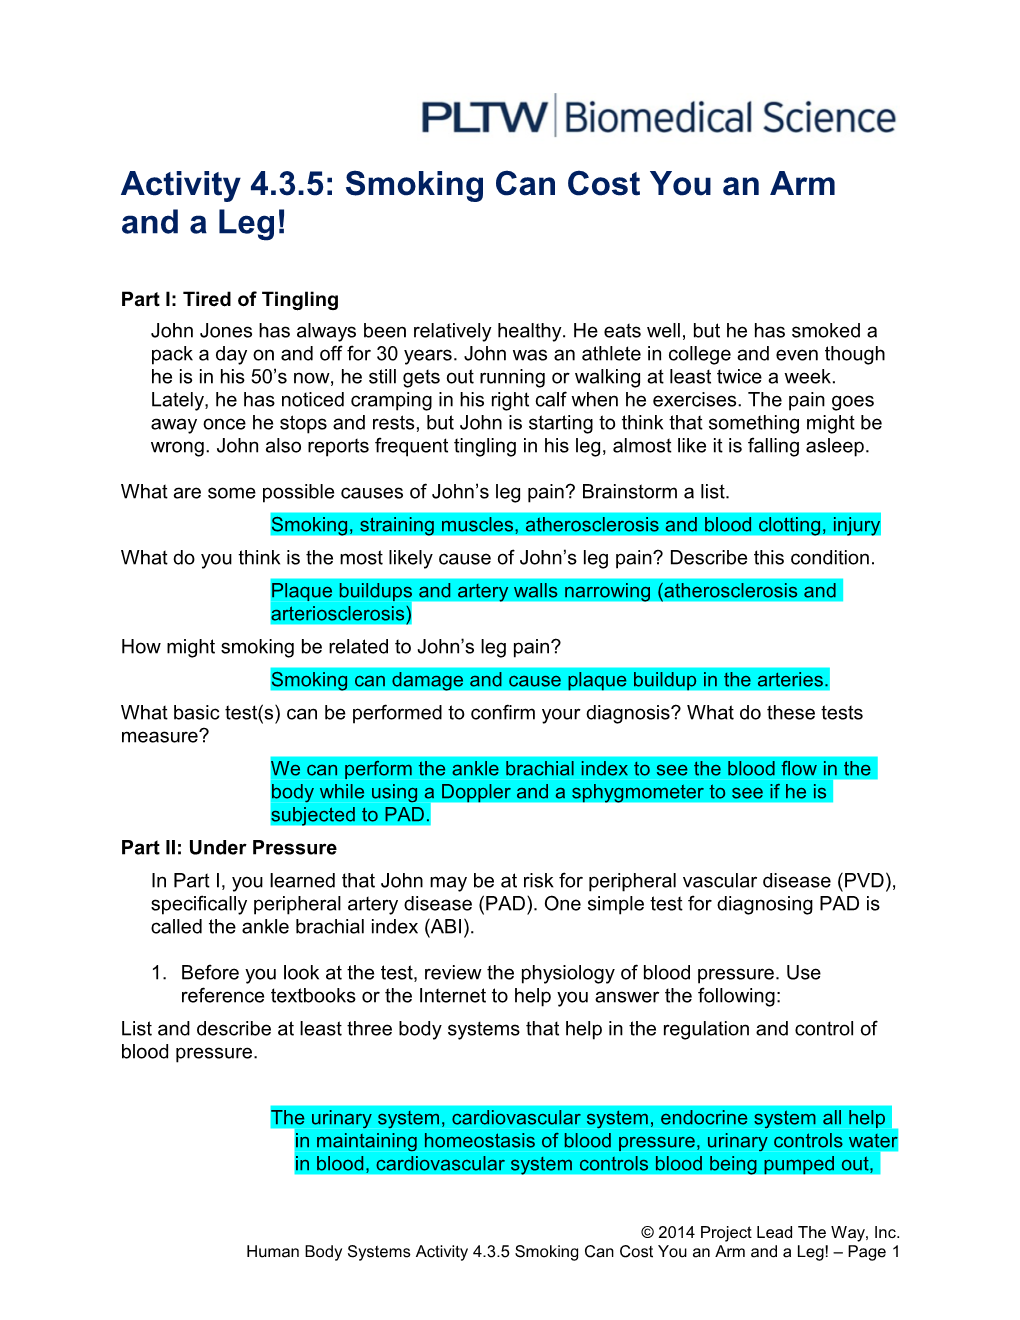 Activity 4.3.5: Smoking Can Cost You an Arm and a Leg!